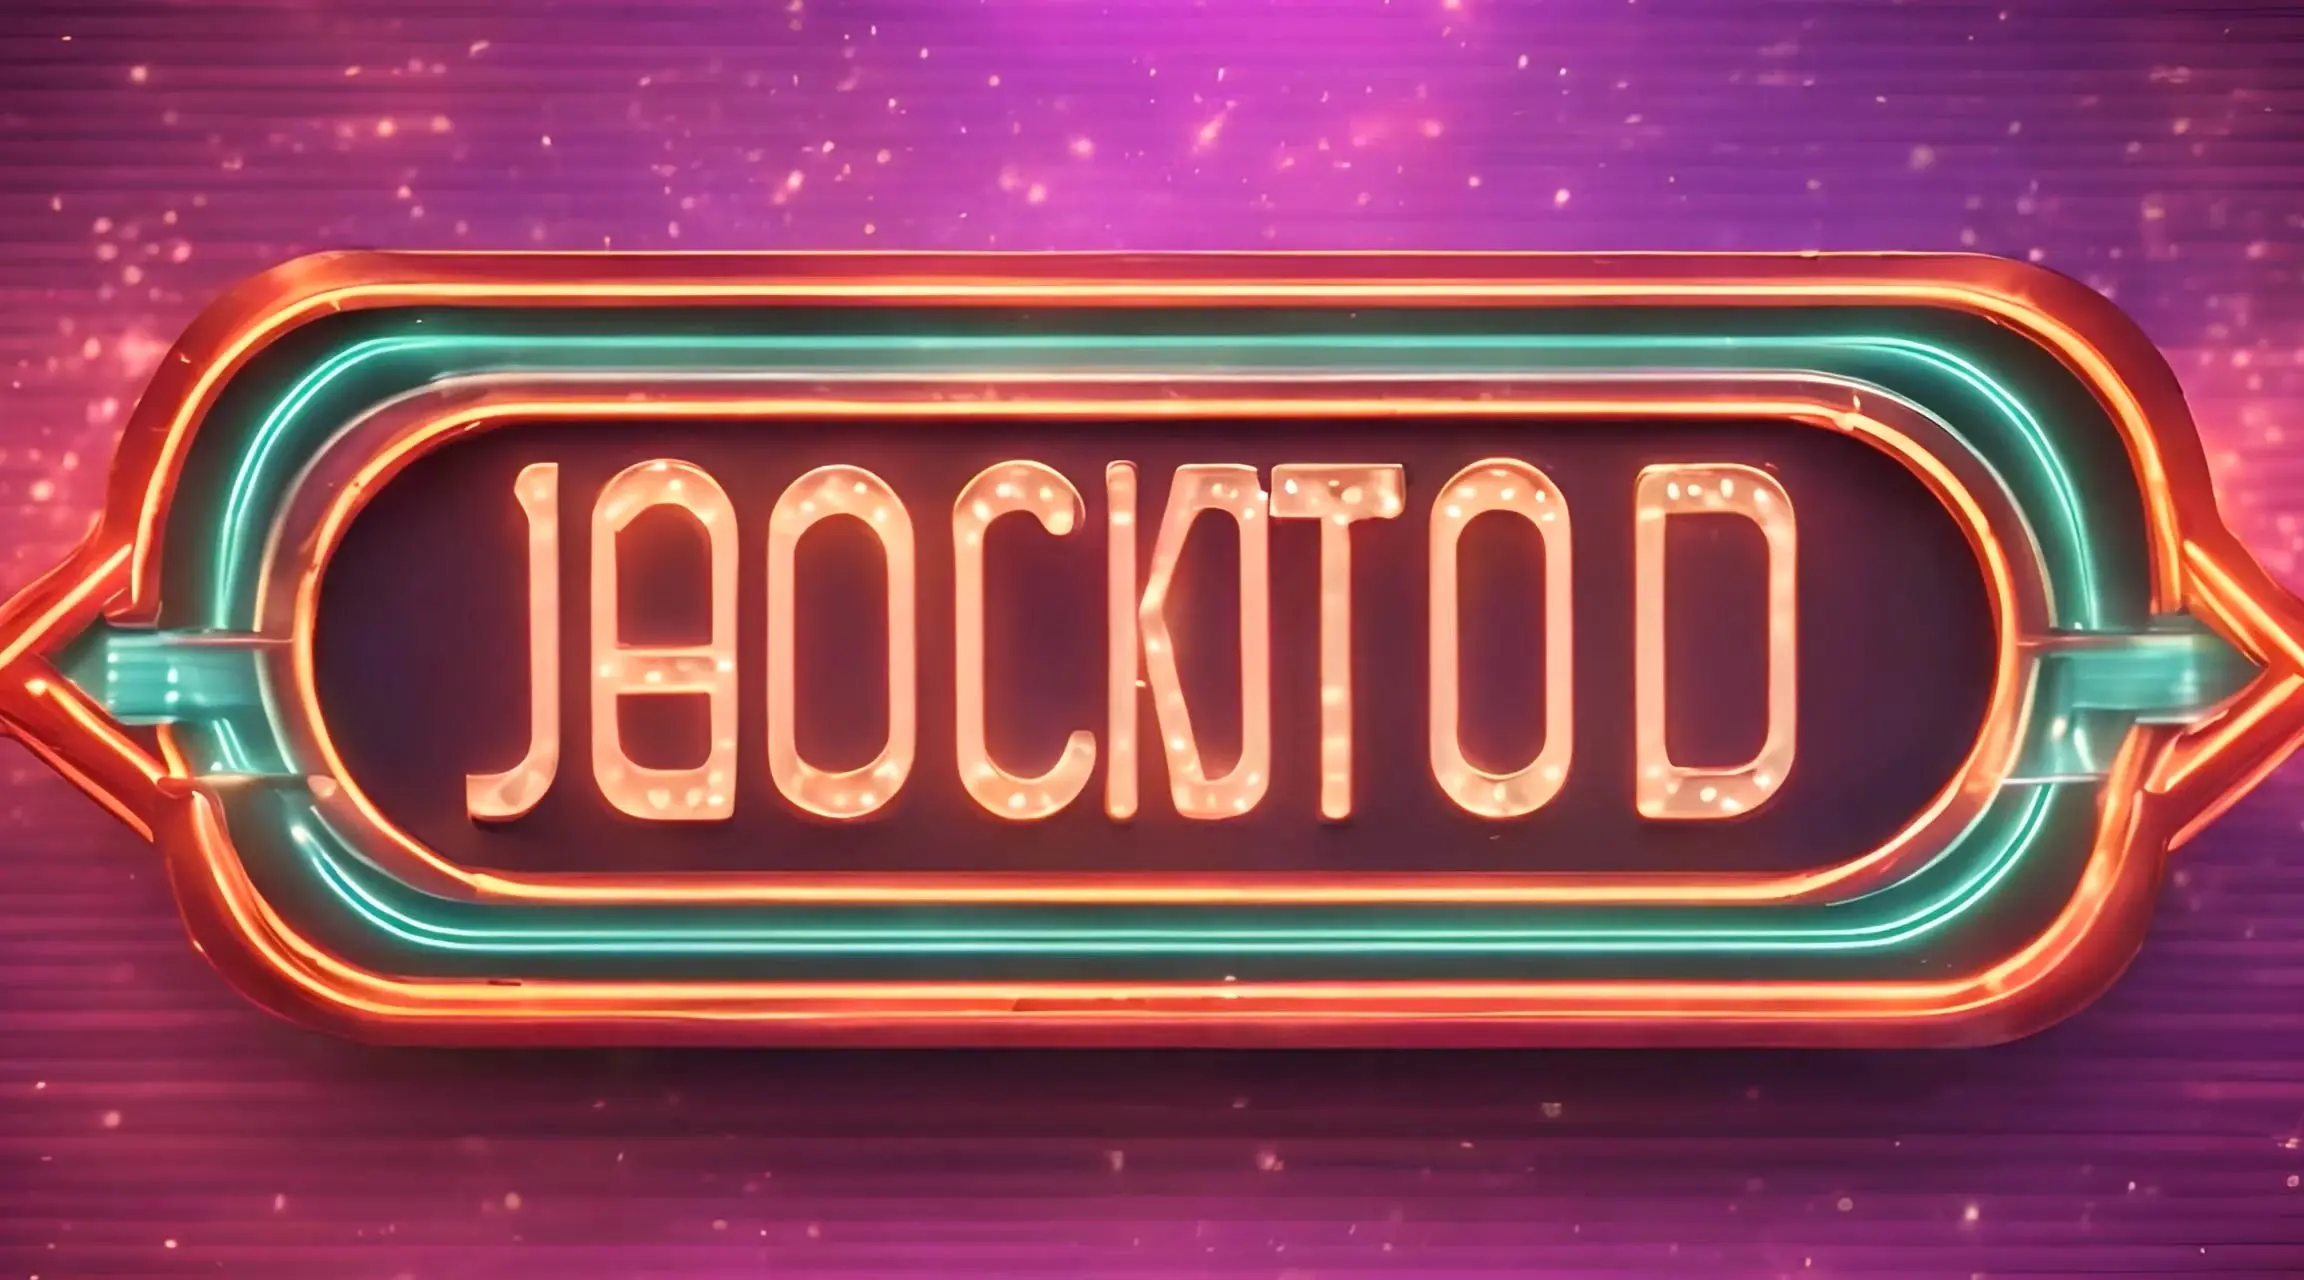 Vintage Style Colorful Neon Sign